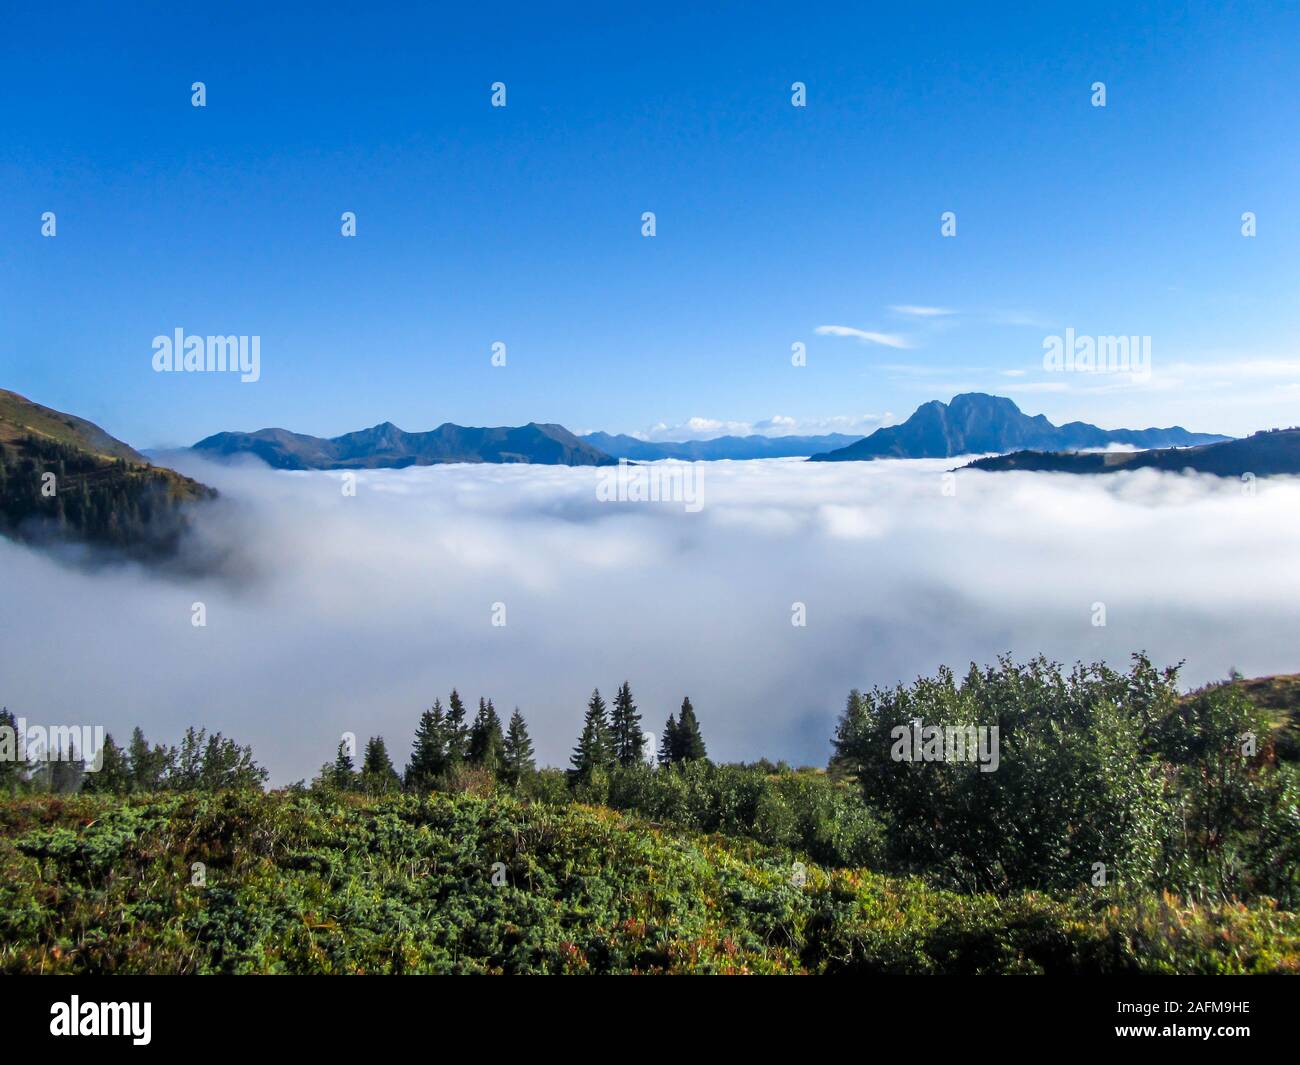 A panoramic view on Alpine valley. The valley is shrouded in dense fog, only tall mountain peaks are visible. Hiking trails in the high mountain. Endl Stock Photo